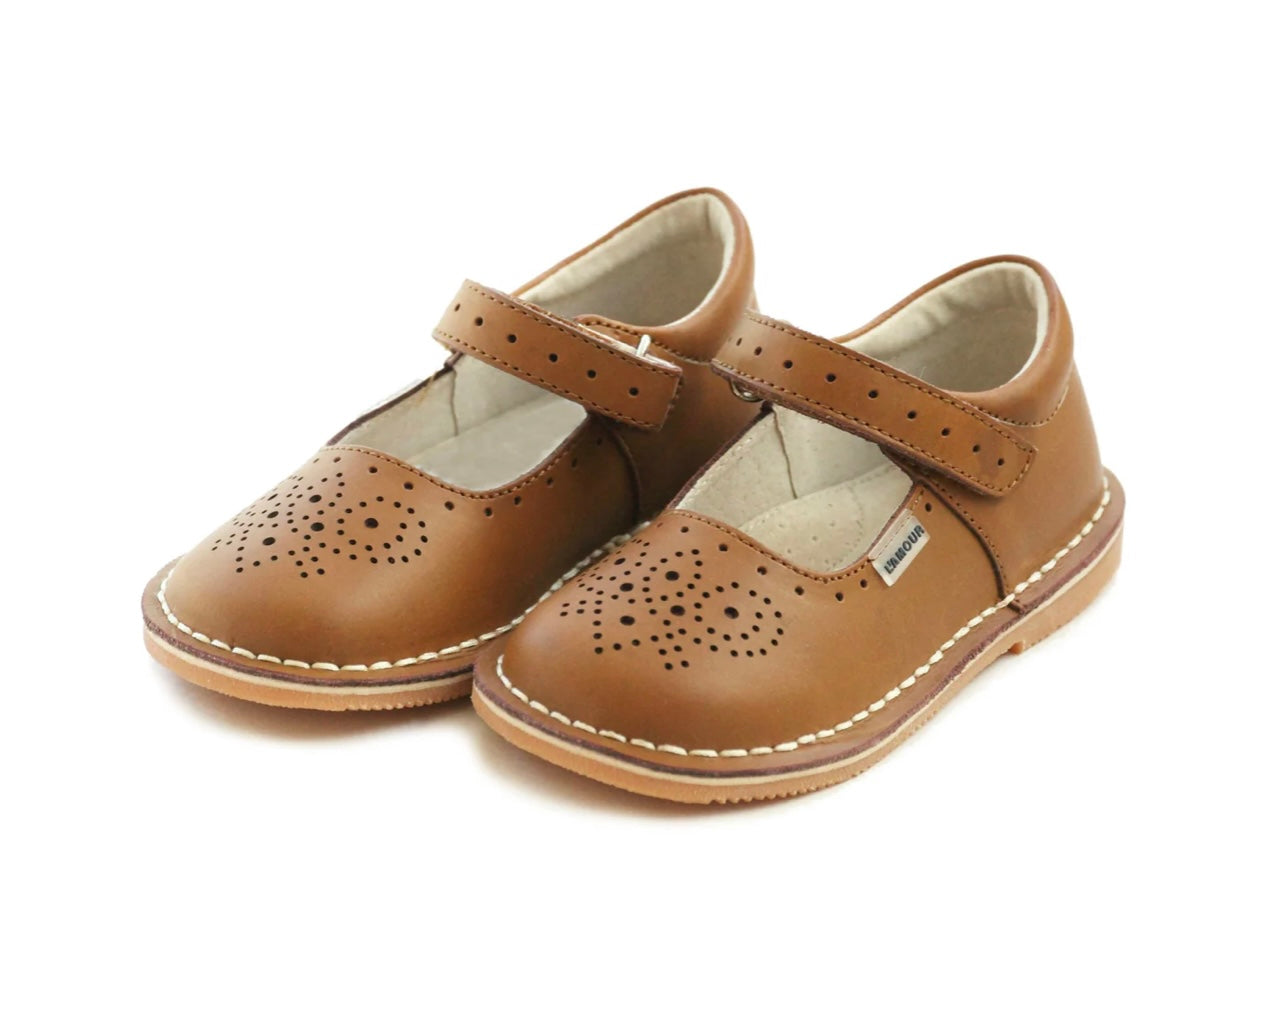 L’amour Ollie Stitch Down Mary Jane- Brown